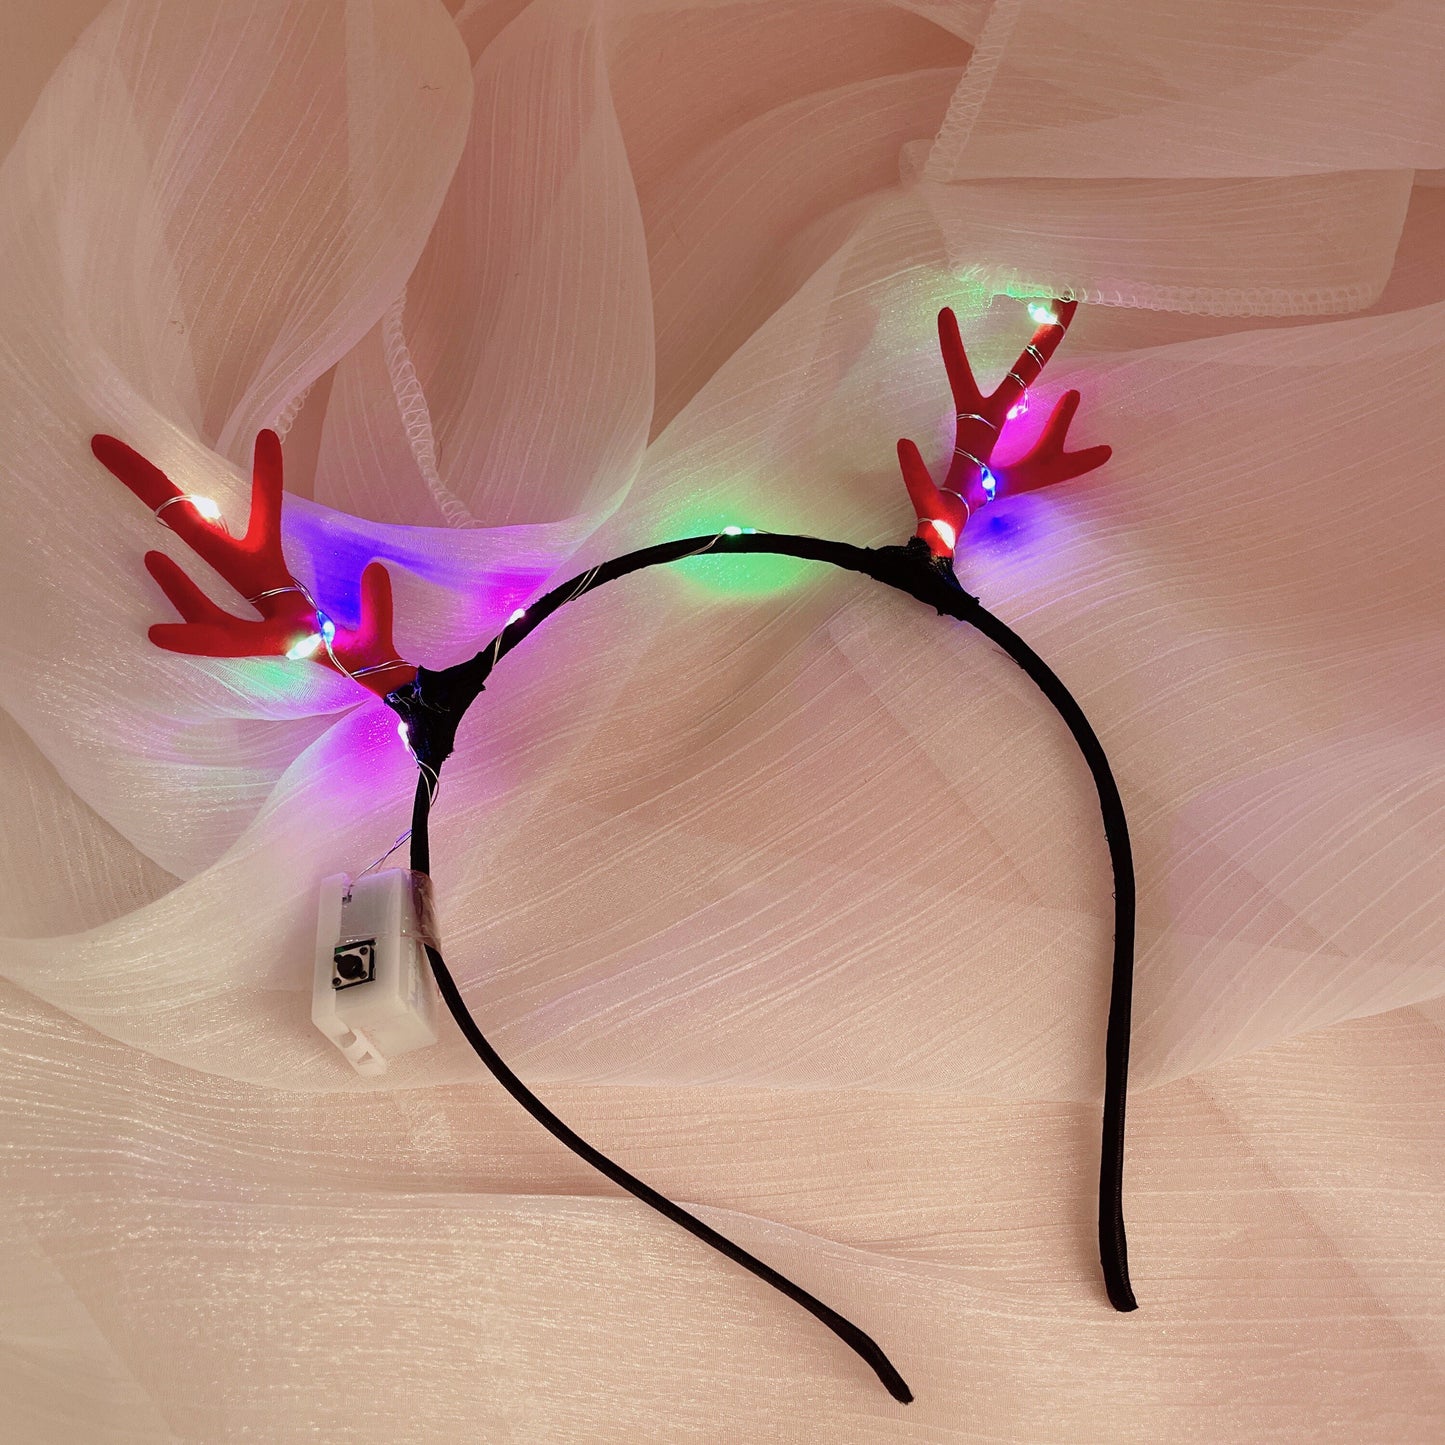 Reindeer Antlers Hand band with lights, 3 modes lights, Christmas Party Supplies, Gift for Girls